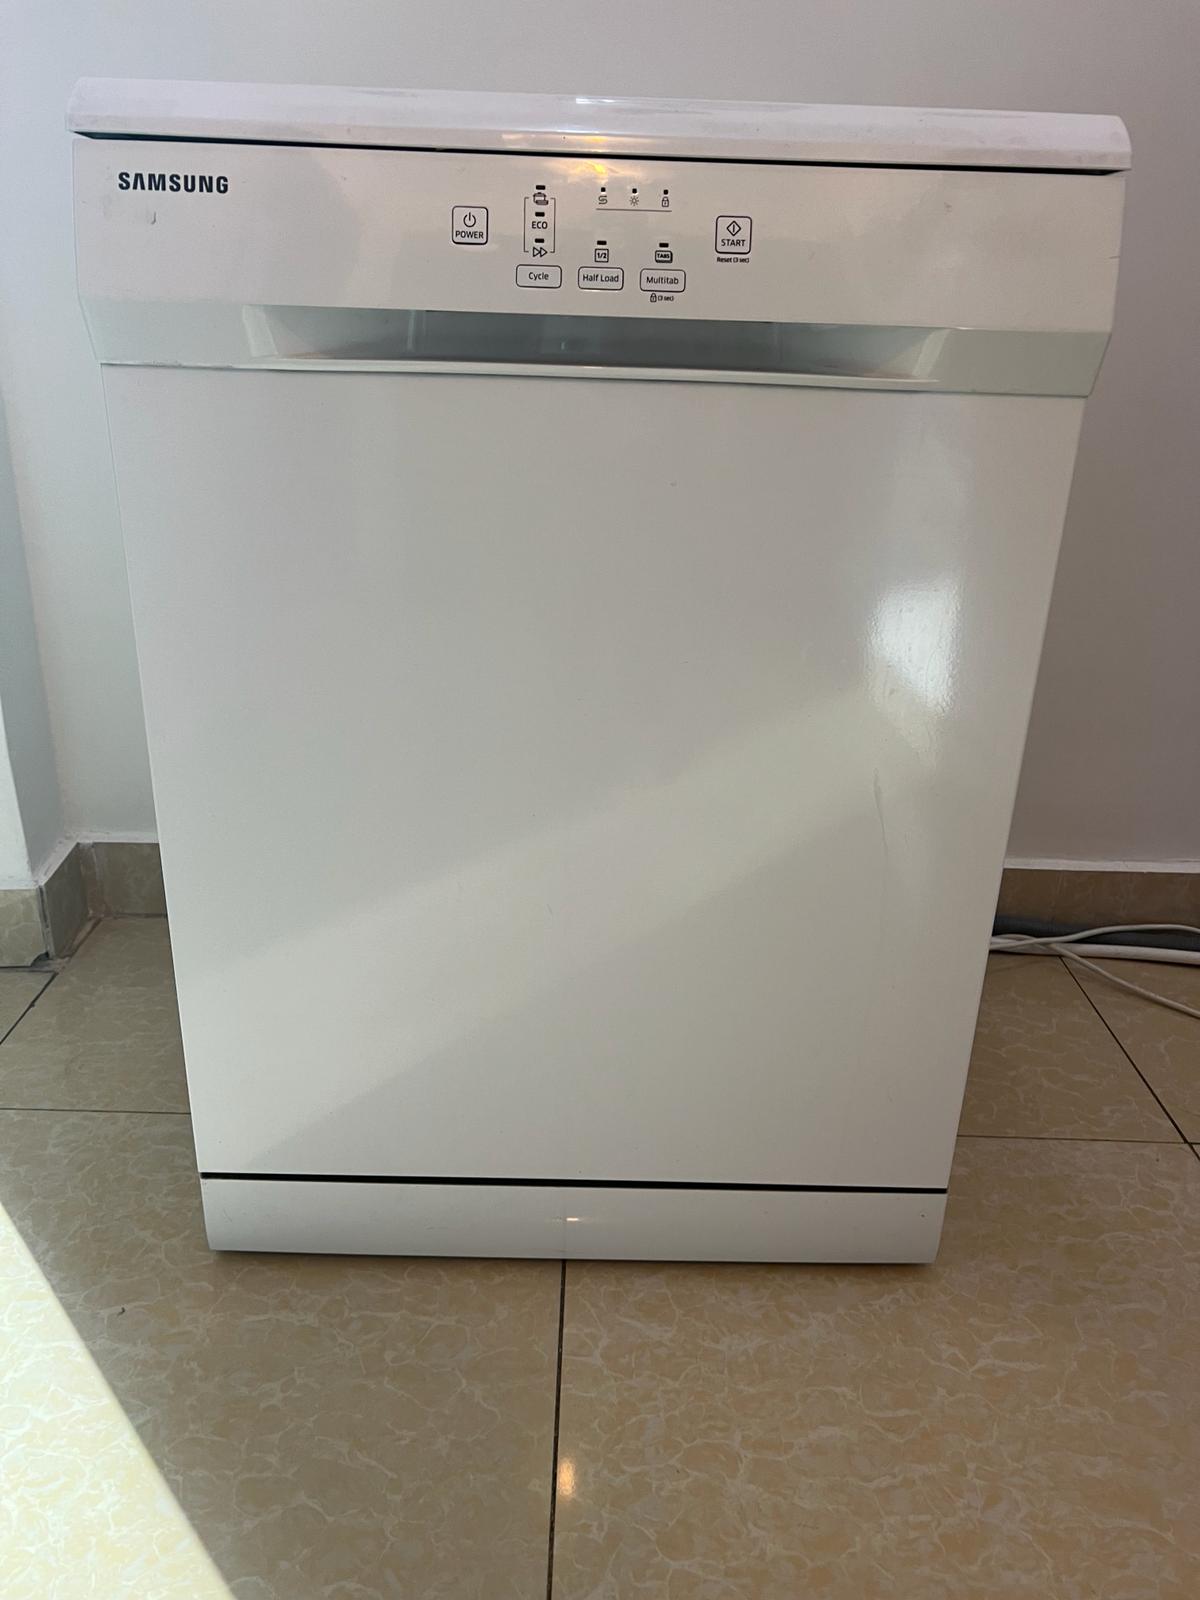 Good condition Samsung Dishwasher for sale